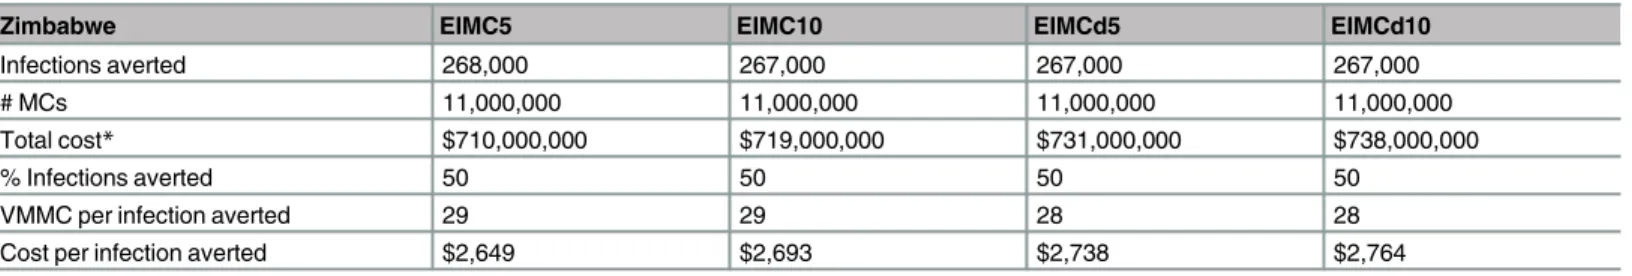 Fig 3. Annual number of VMMCs to be conducted under four timing scenarios. (a) EIMC introduced immediately and scaled up to 80% over 5 years (EIMC 5), (b) EIMC introduced immediately and scaled up to 80% over 10 years (EIMC 10), (c) EIMC introduced after 5